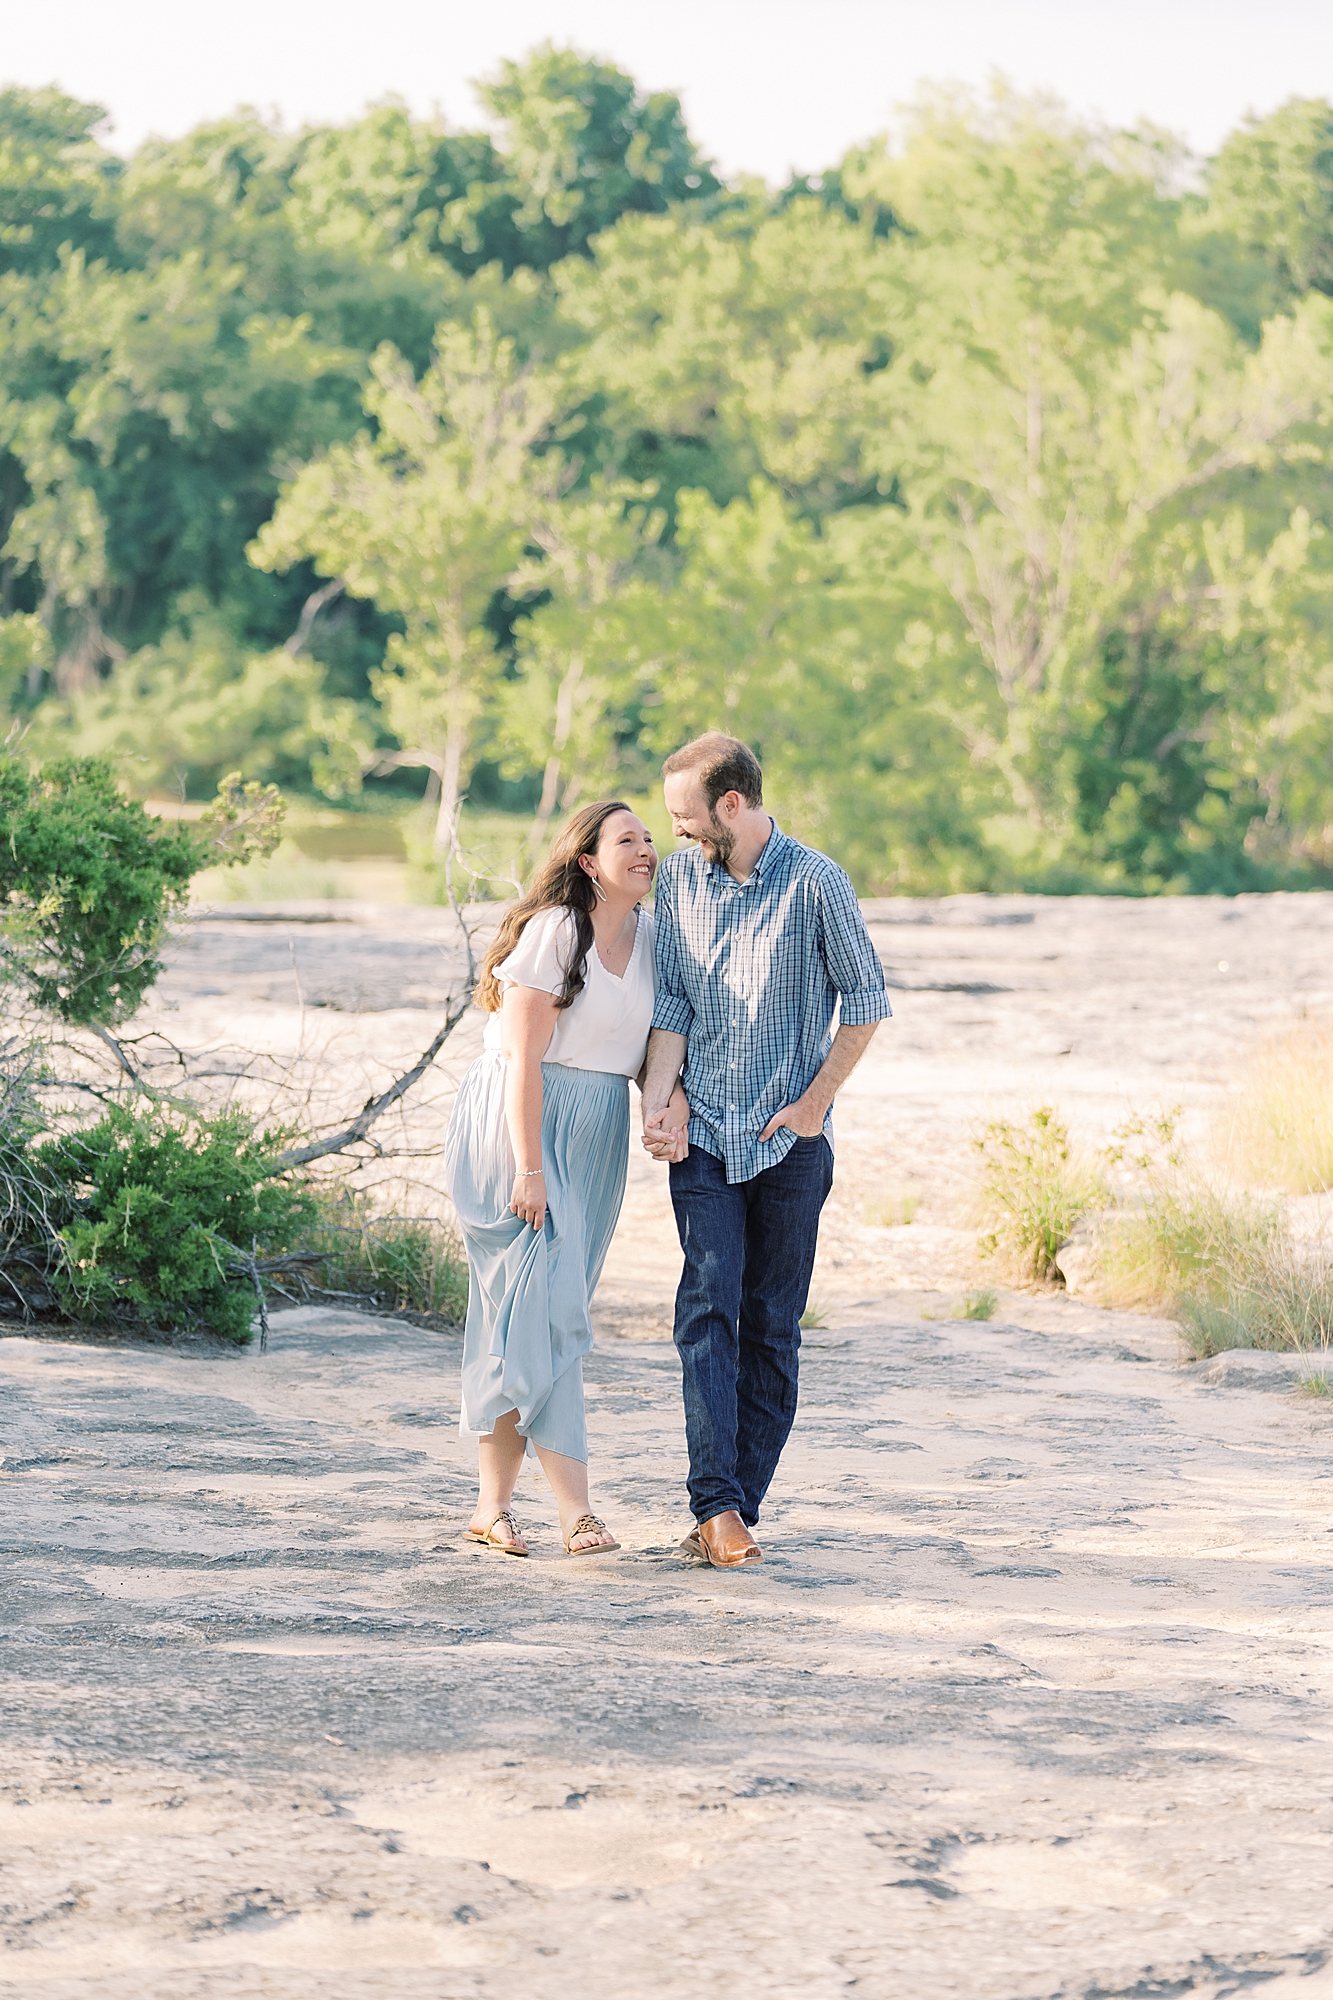 This super sweet McKinney Falls engagement session in Austin, Texas features the cutest couple ever! If you're looking for engagement session color pallet, look no further! Click through to see more! #engagementsessionoutfits #engagementsession #coupleoutfit #austintexas